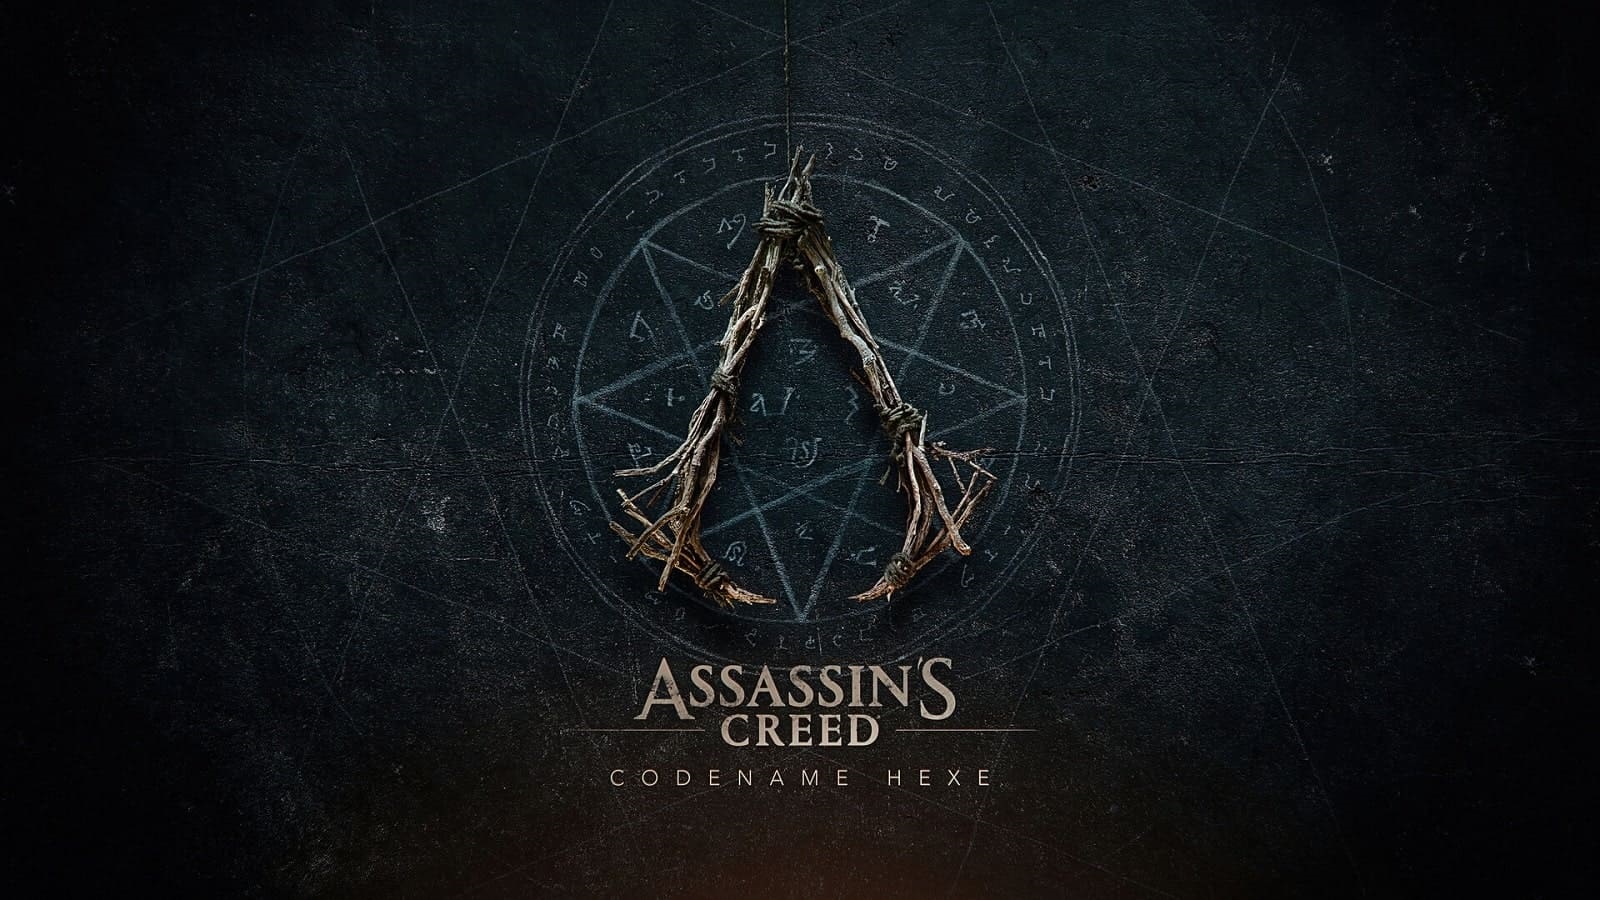 Assassin's Creed Codename Hexe; screenshot: cover